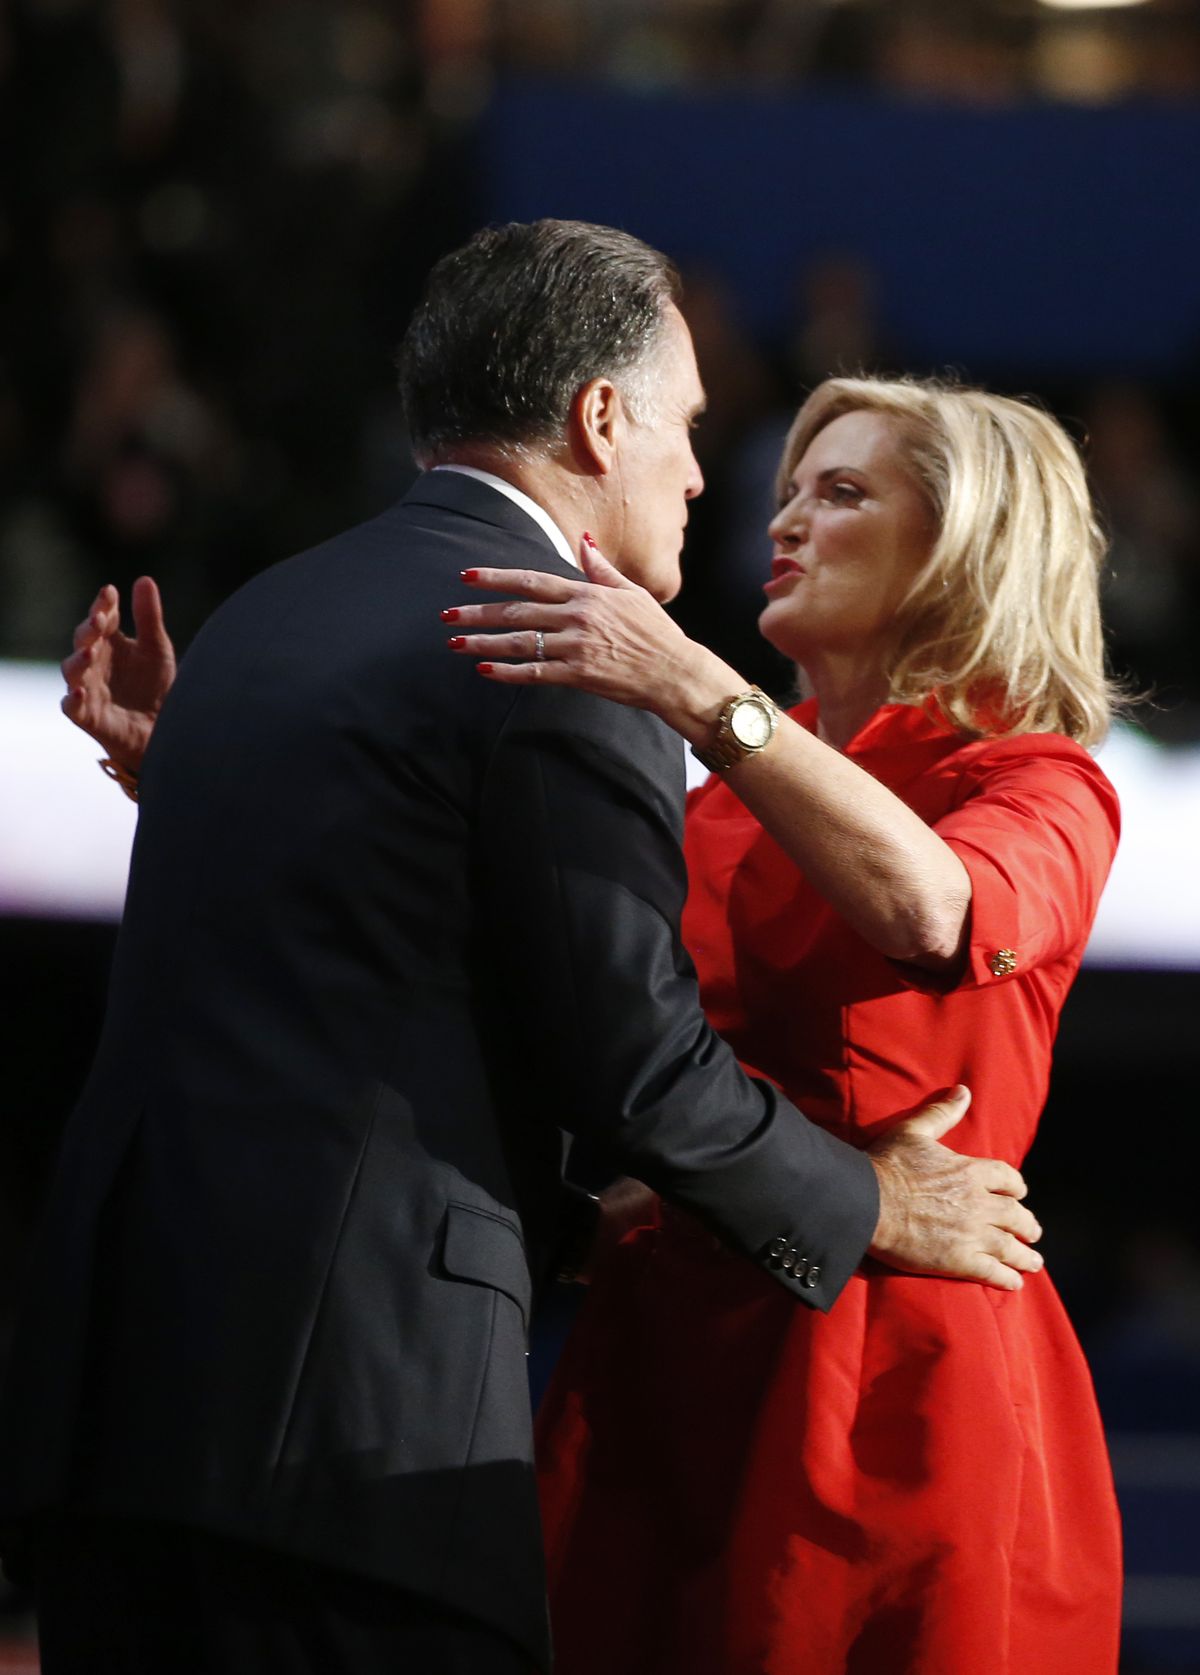 Republican presidential nominee Mitt Romney hugs his wife Ann Romney on stage at the Republican National Convention in Tampa, Fla. on Tuesday, Aug. 28, 2012. (Jae Hong / Associated Press)